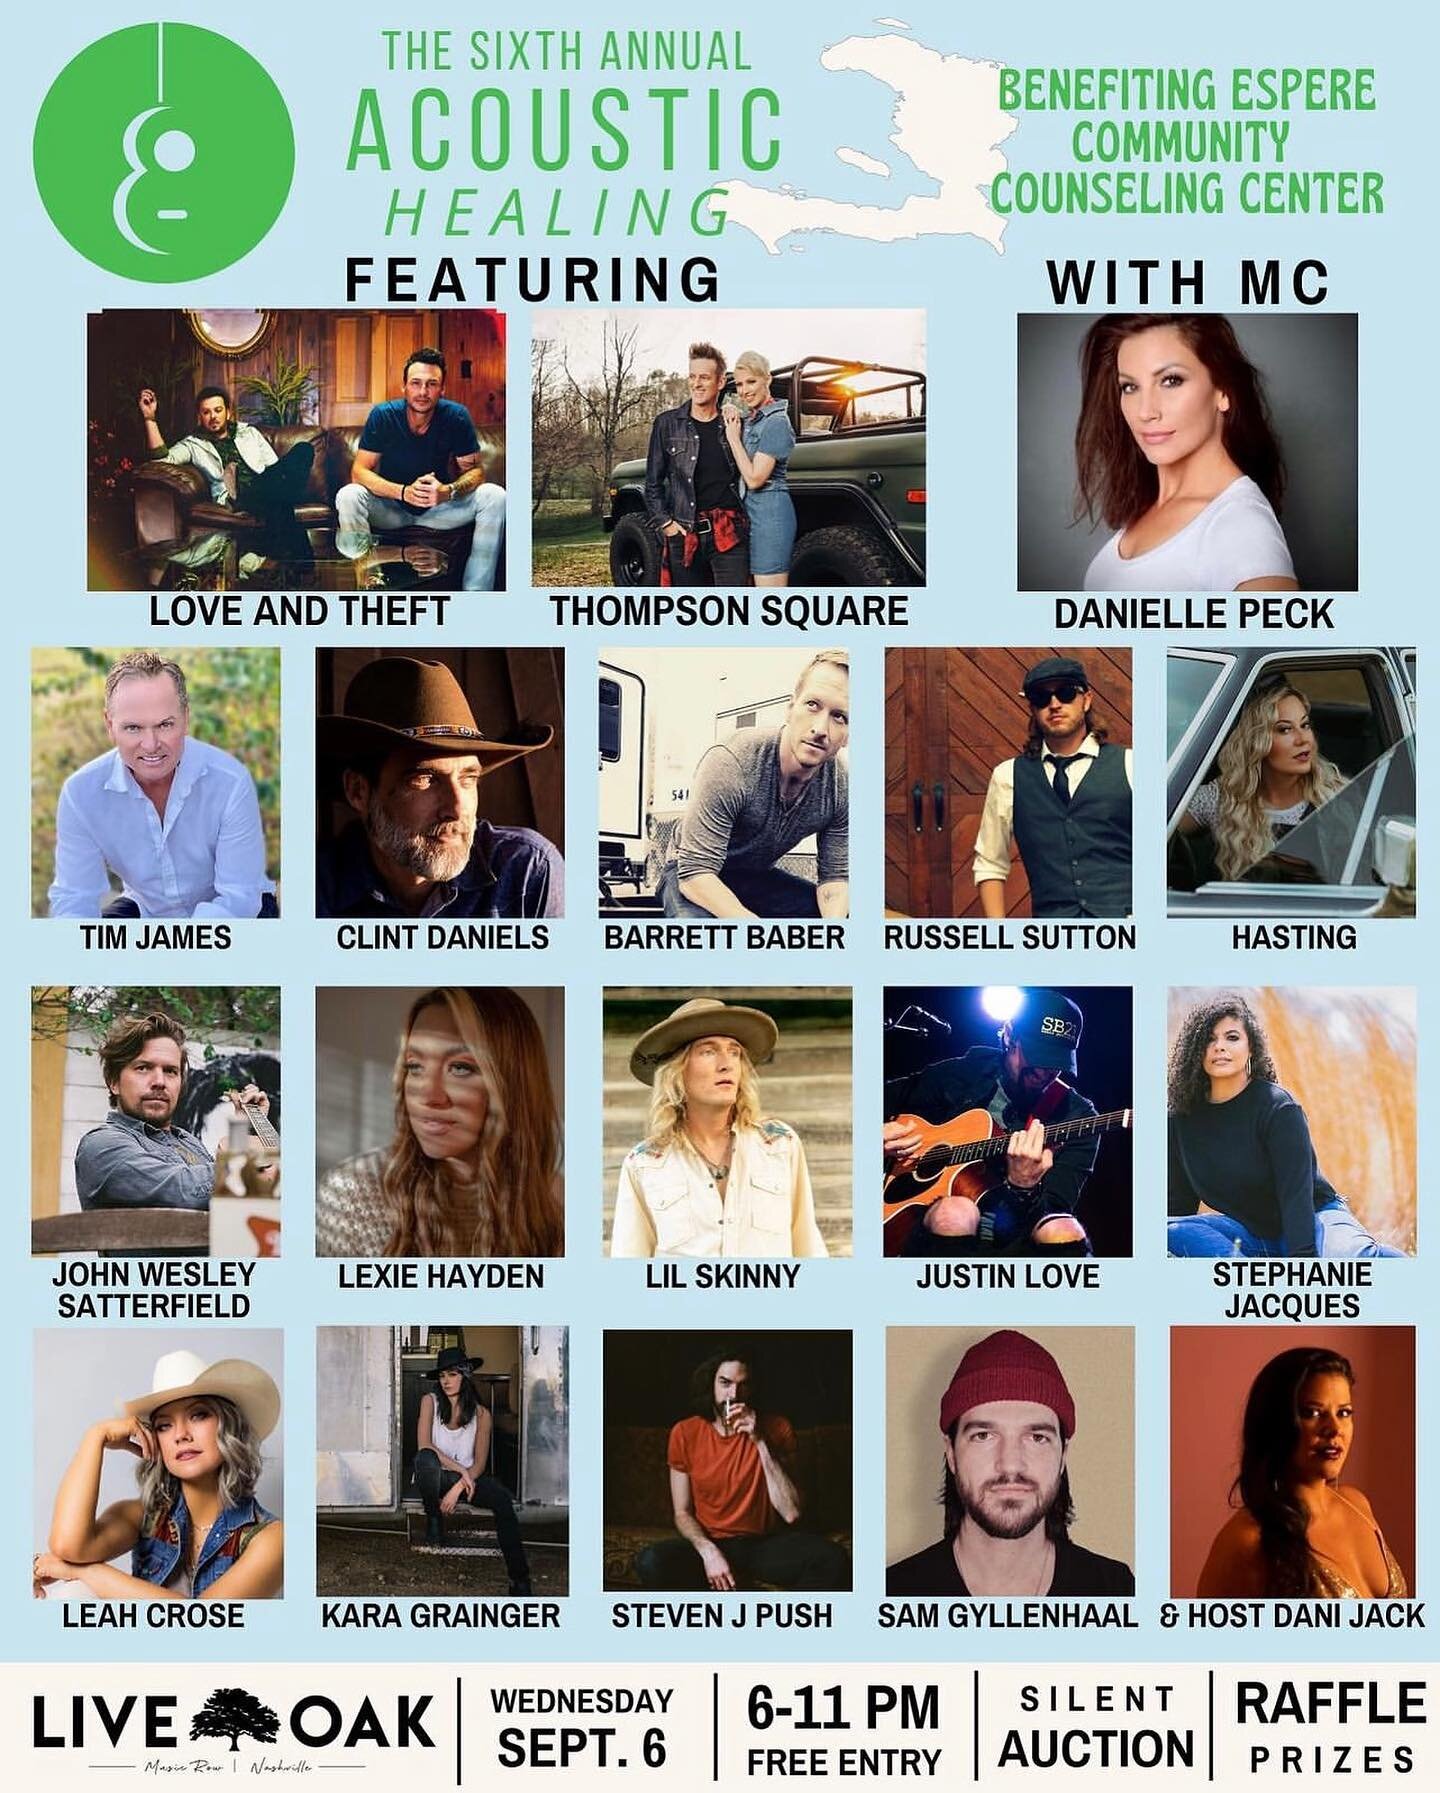 Live Oak is the place to be tonight! I&rsquo;m excited to be a part of this show benefiting the @espere_counseling center. Lots of great writers performing all night from 6-11pm with some killer raffles and a silent auction to raise money. Come hang!